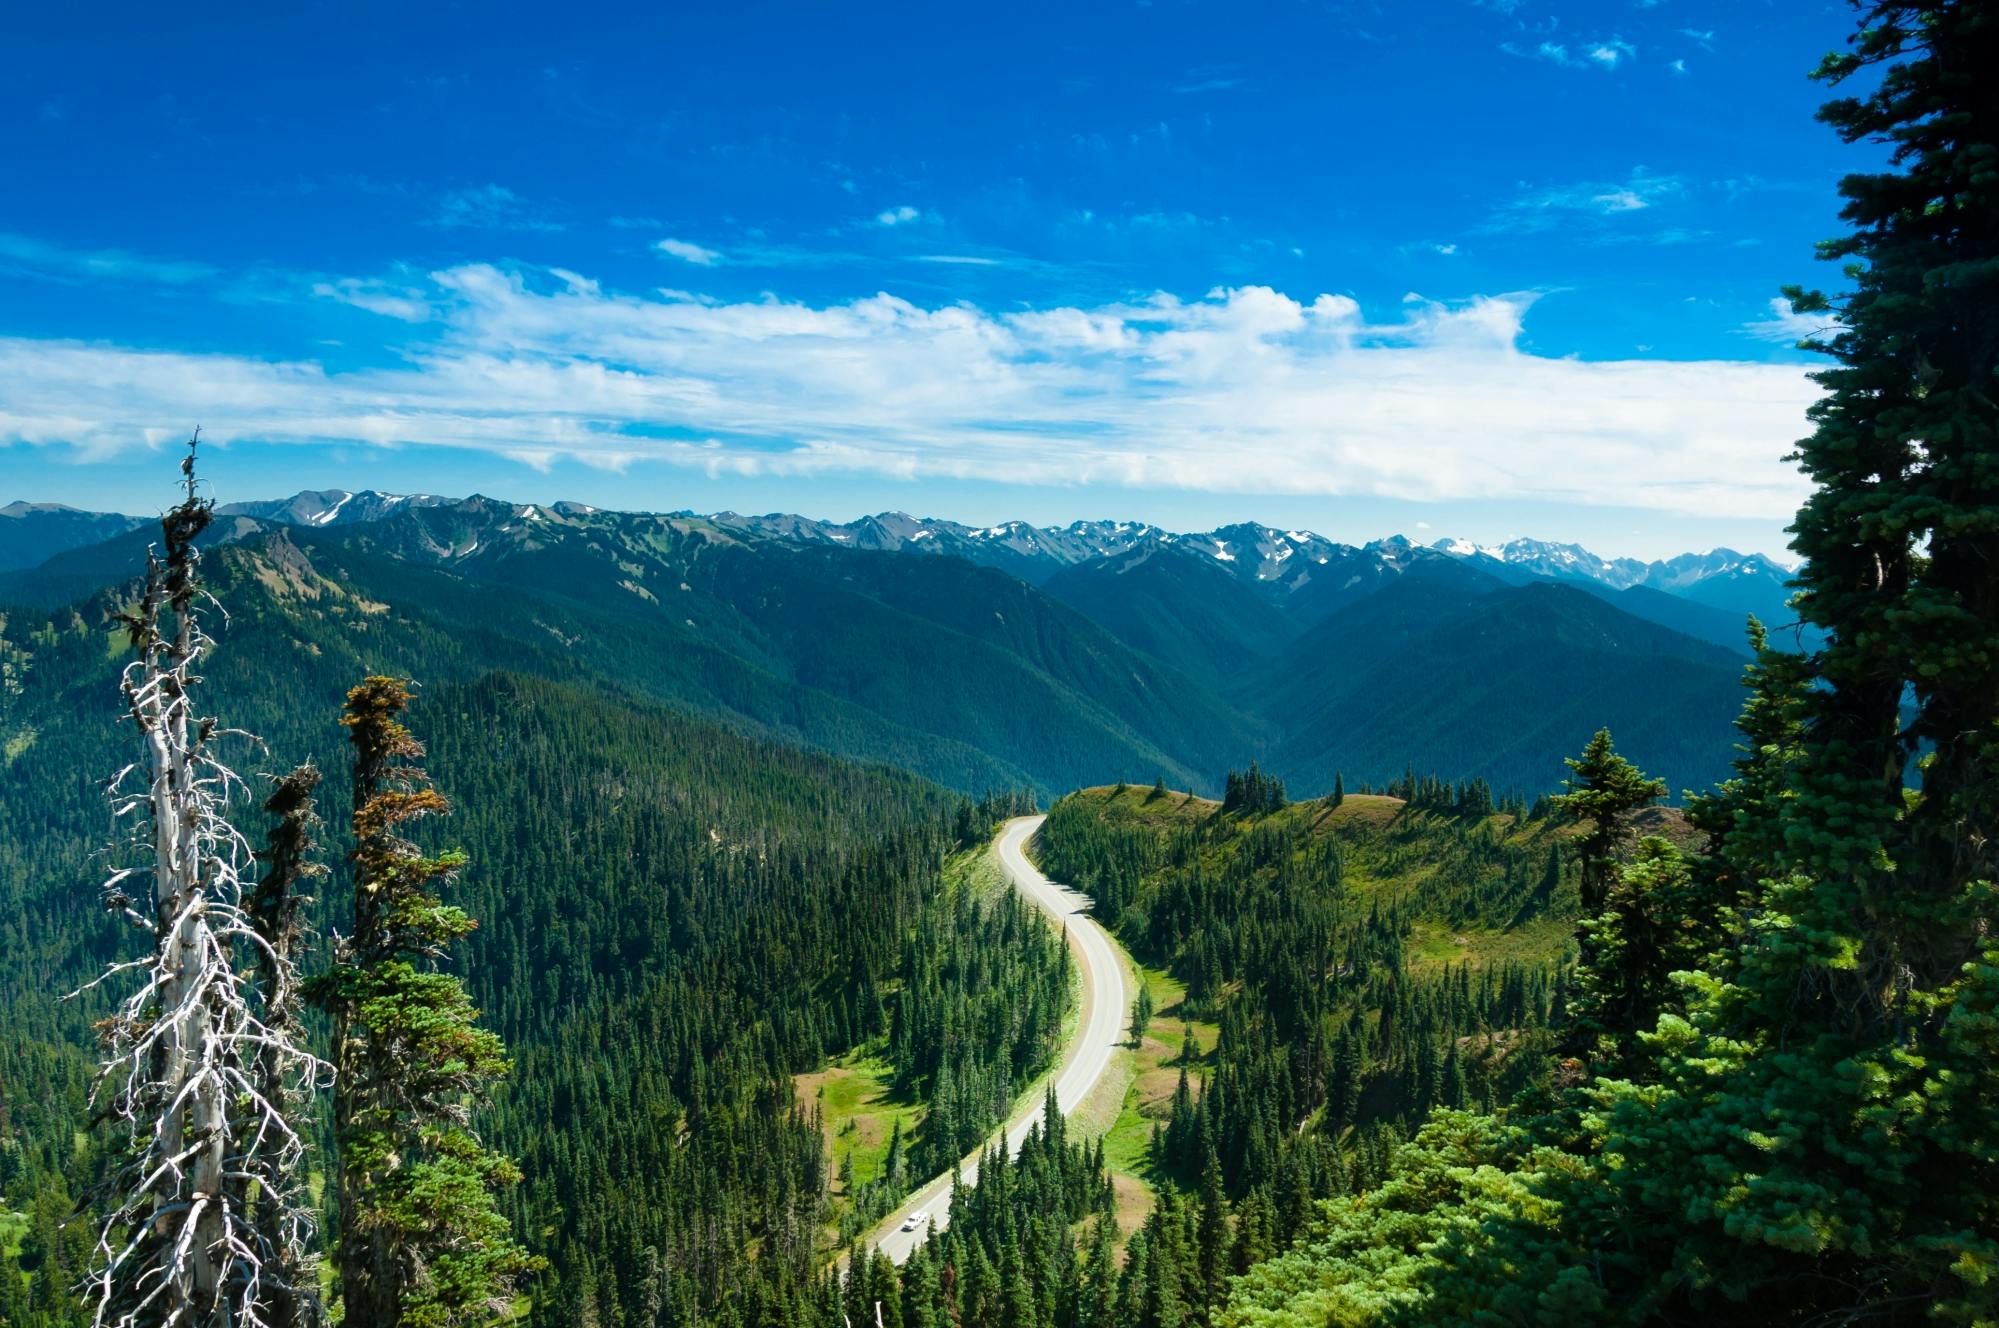 Olympic National Park self-guided driving audio tour